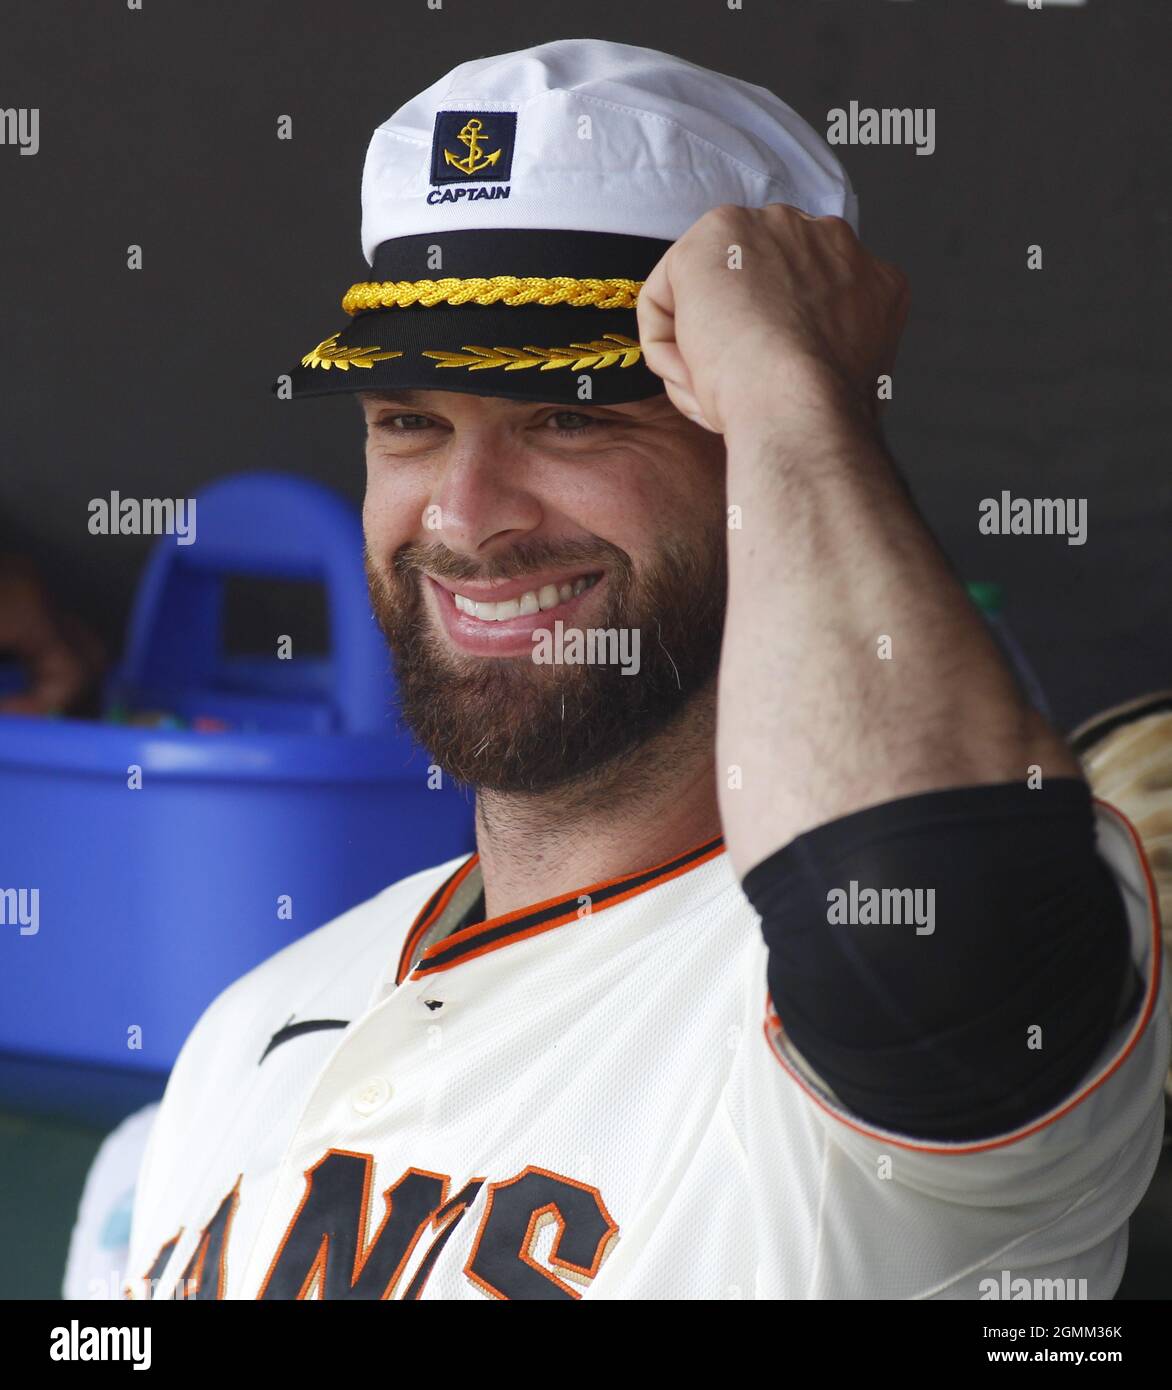 San Francisco, United States. 19th Sep, 2021. San Francisco Giants Brandon  Belt wears a captain's cap in the dugout before a game against the Atlanta  Braves at Oracle Park on Sunday, September